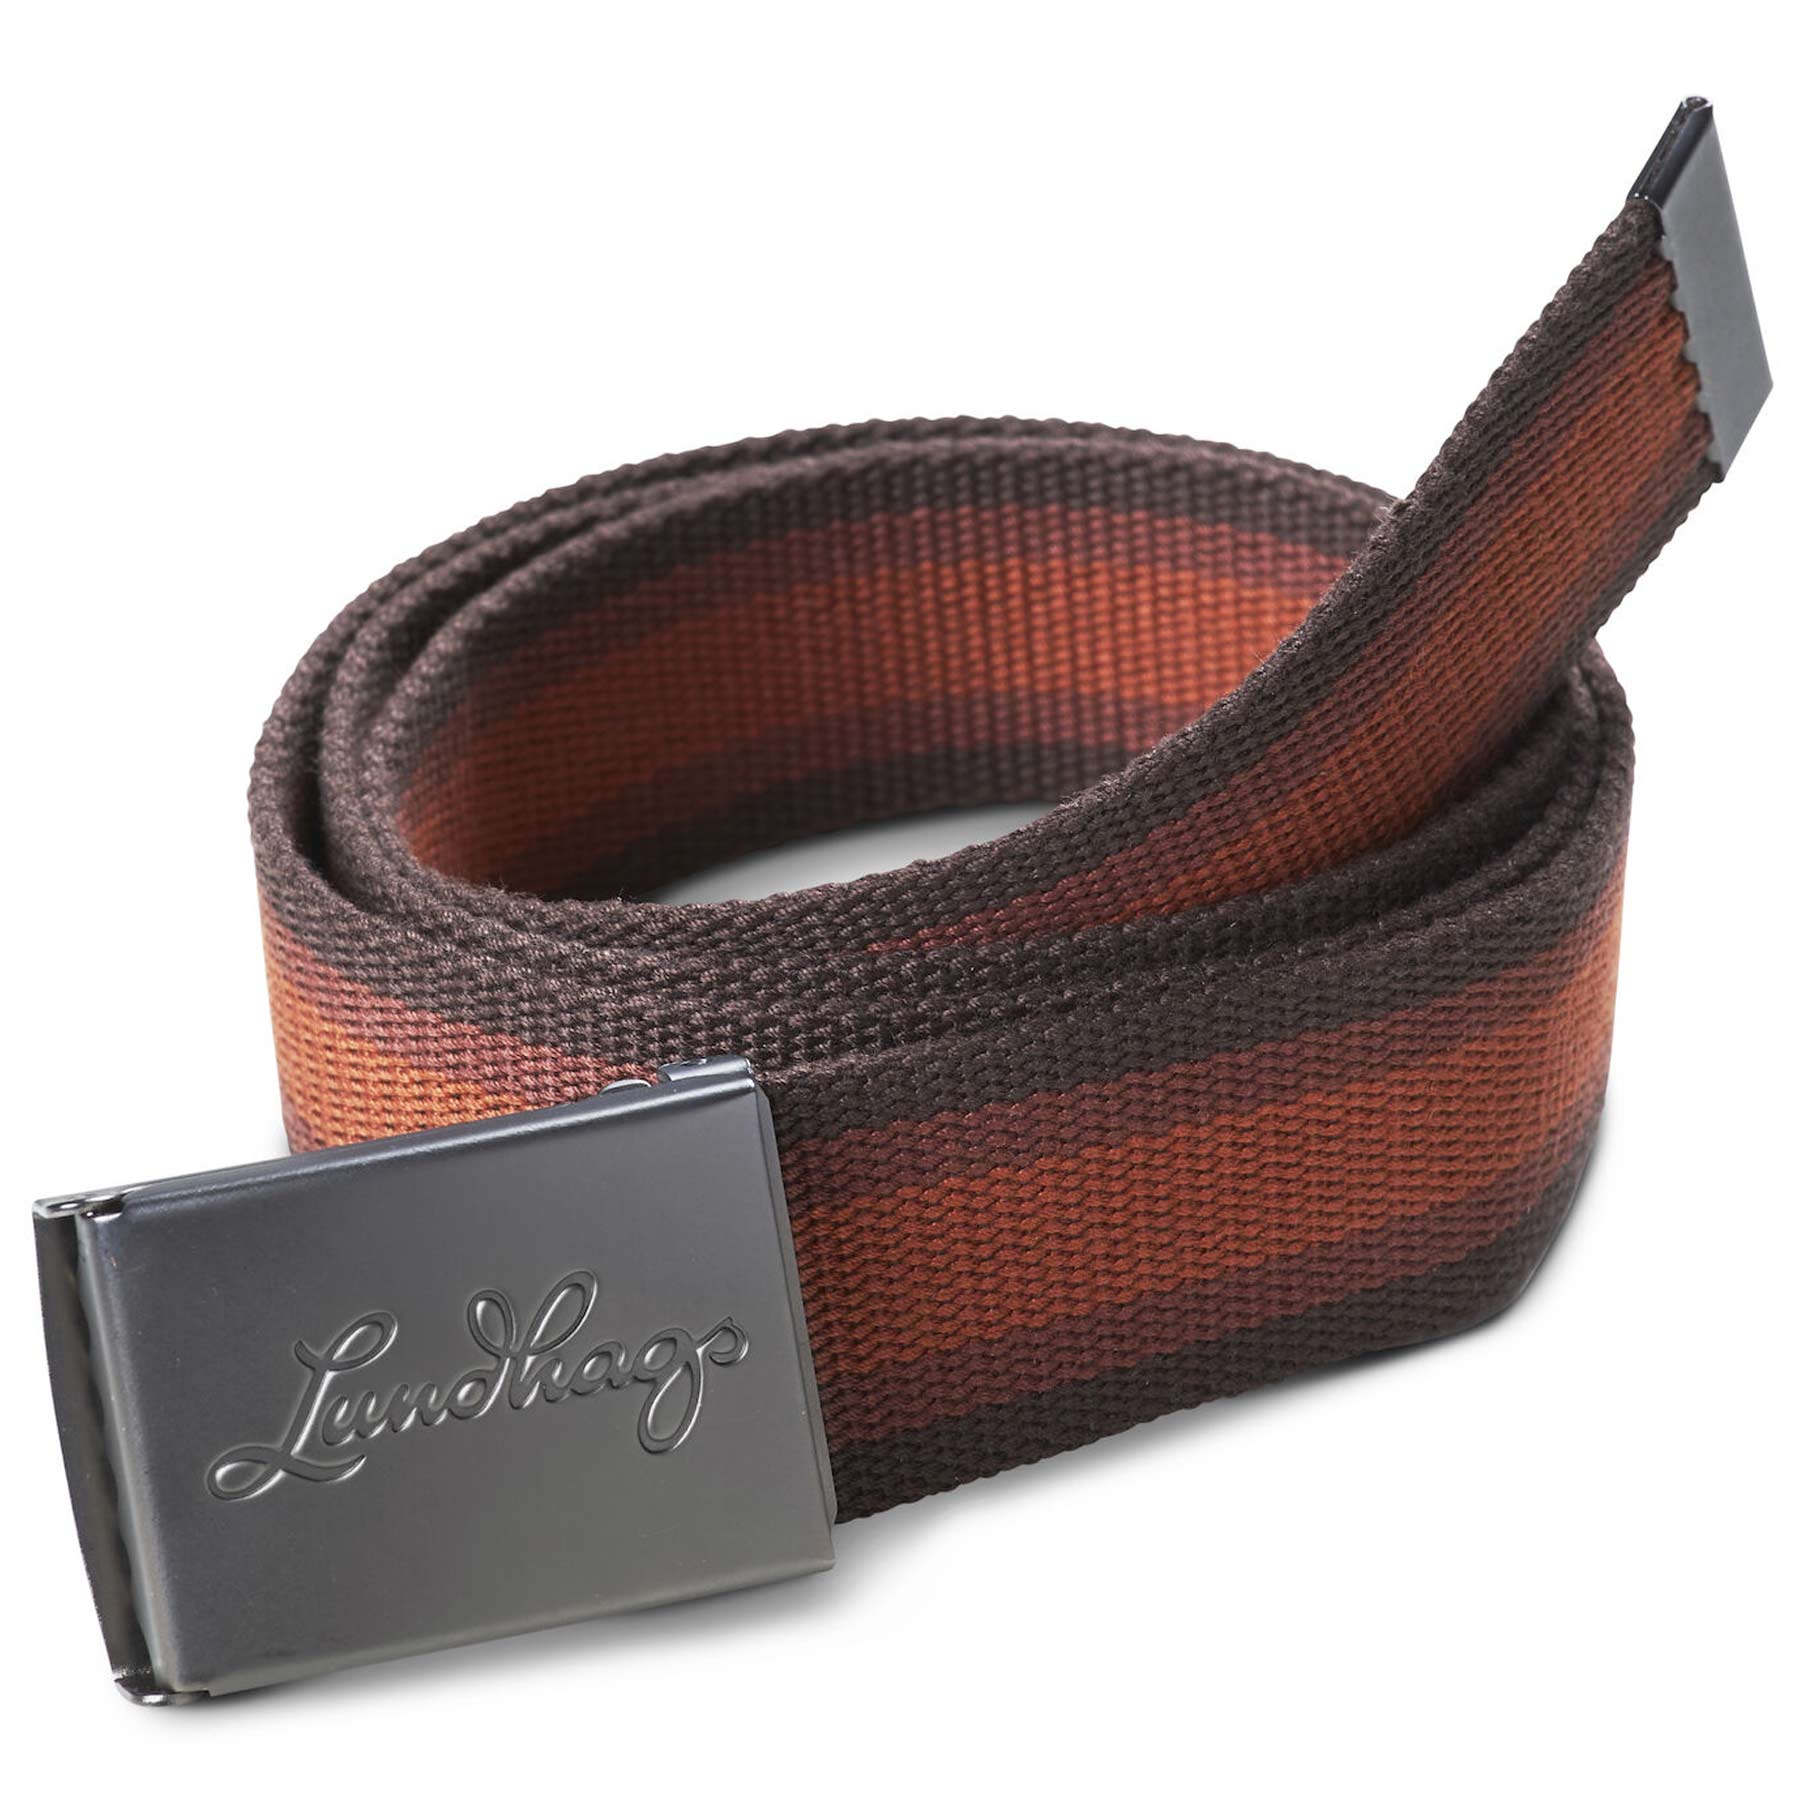 Picture of Lundhags Buckle Belt - Amber 281